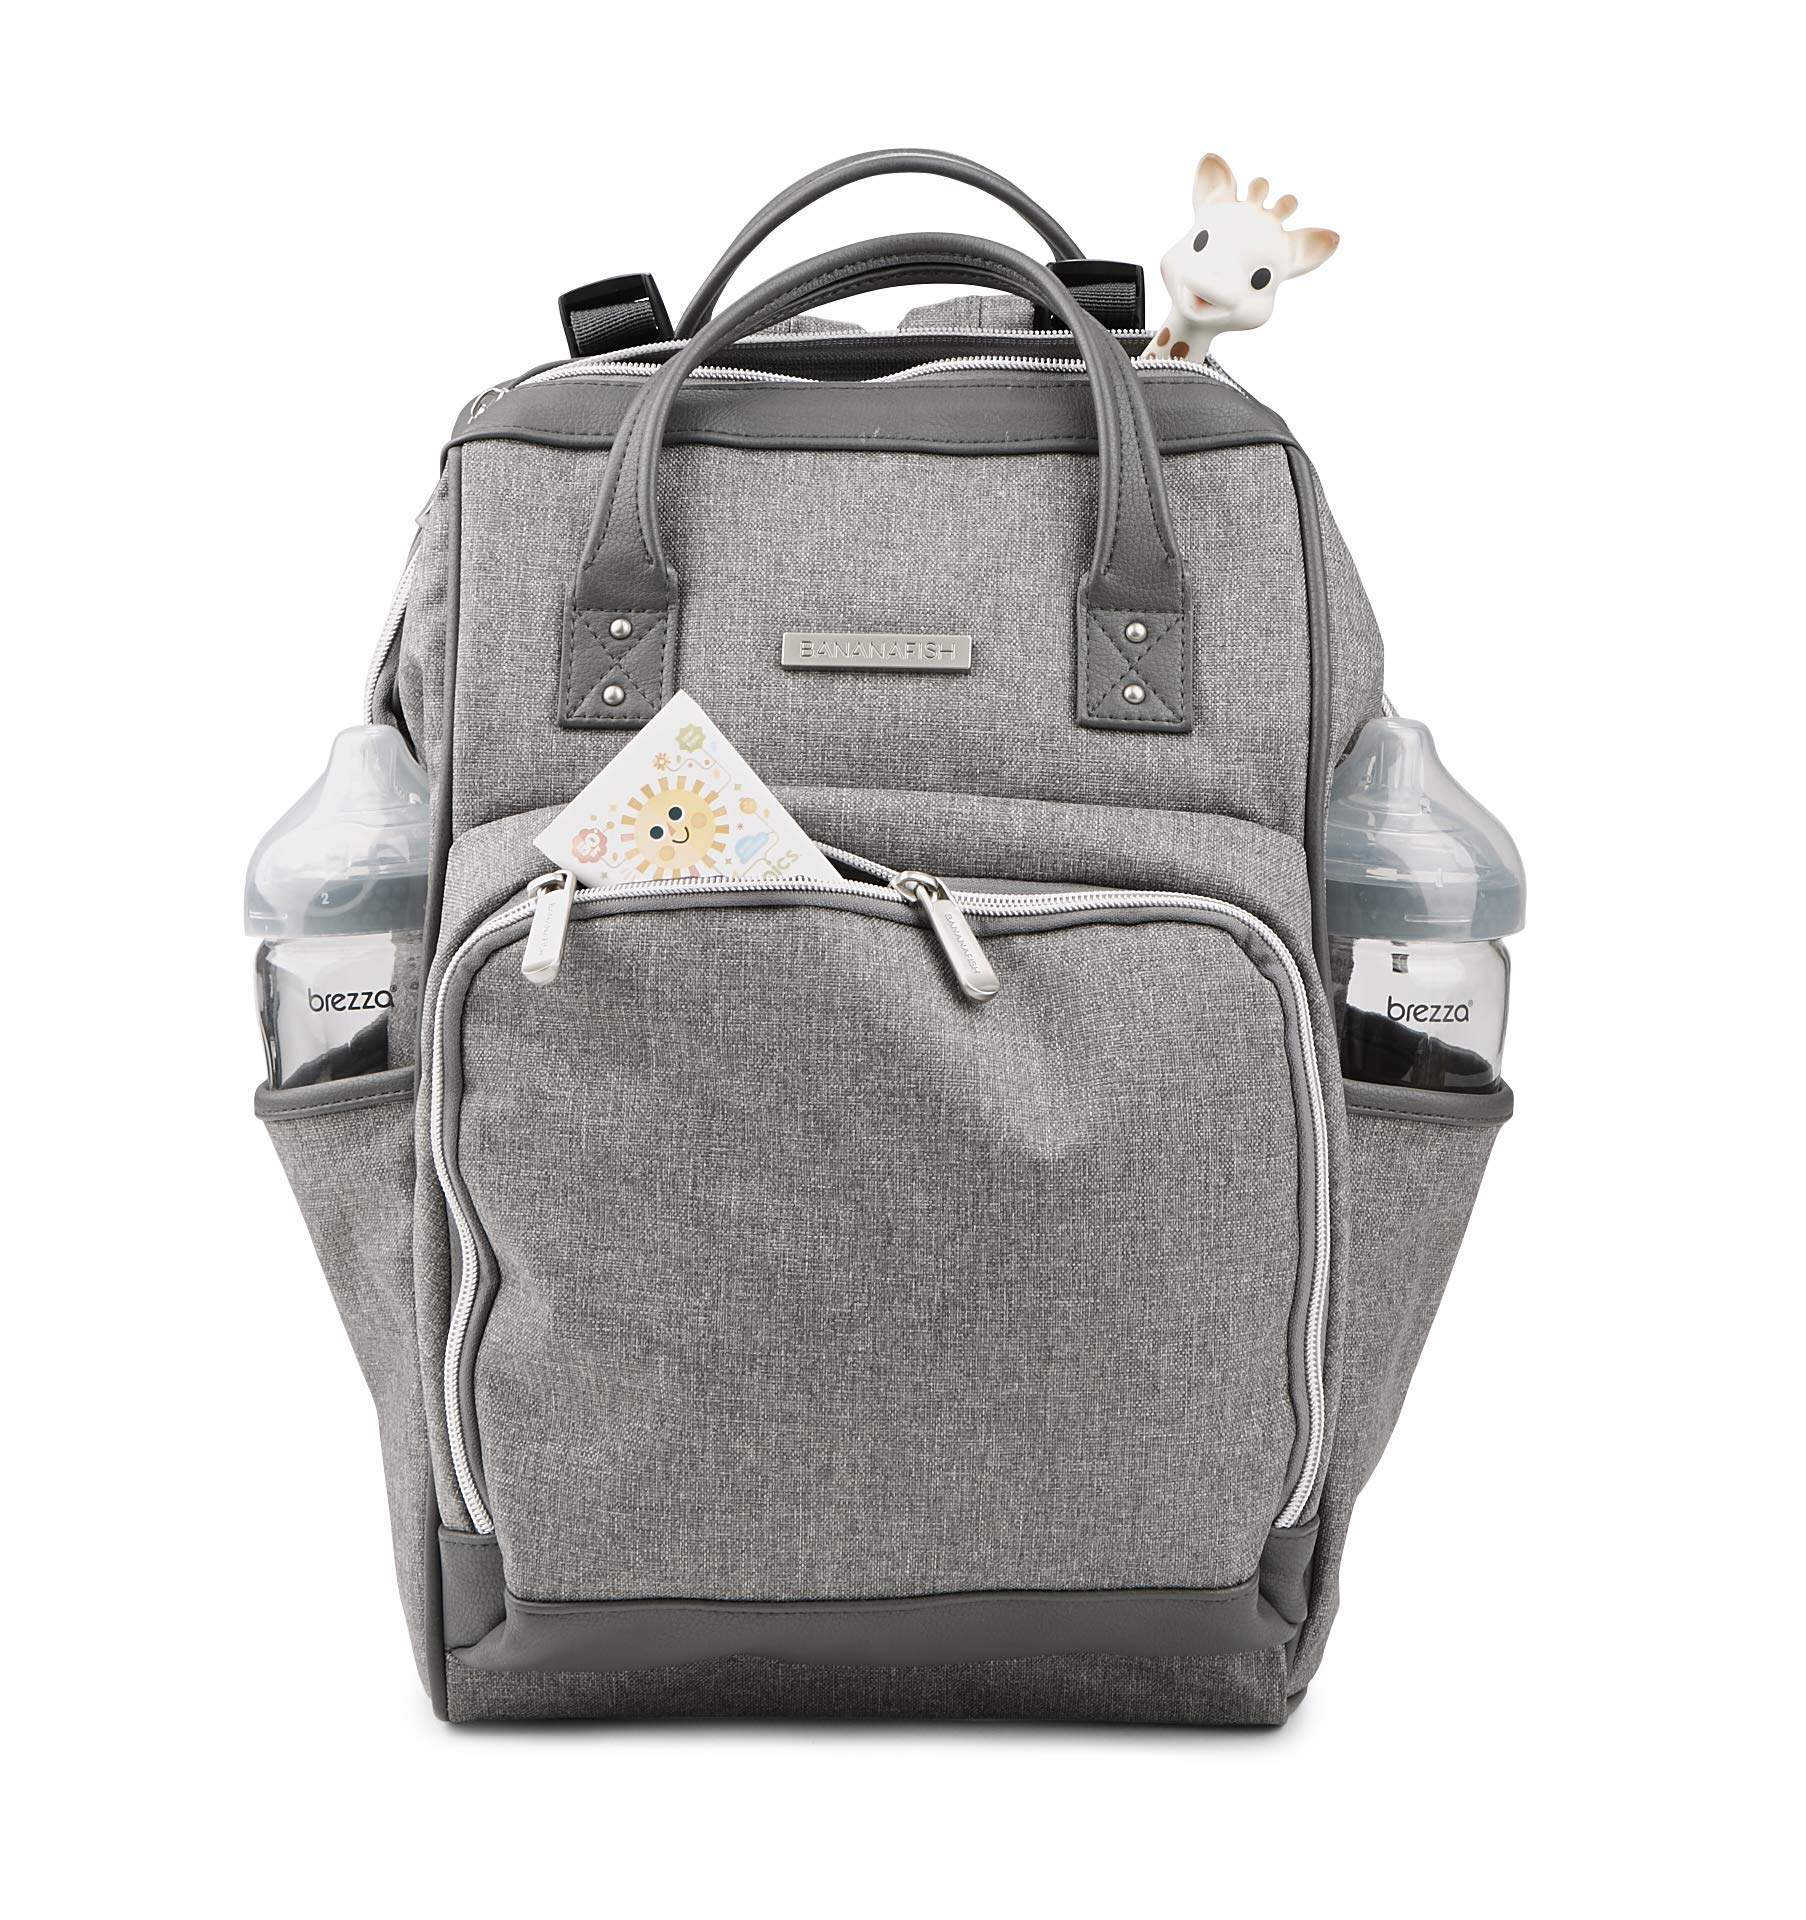 Multi-Function Design Nappy Bag for Baby Care or Travel - Carry or Wear as Backpack - Large Capacity in Trendy, Stylish Design, Light Grey